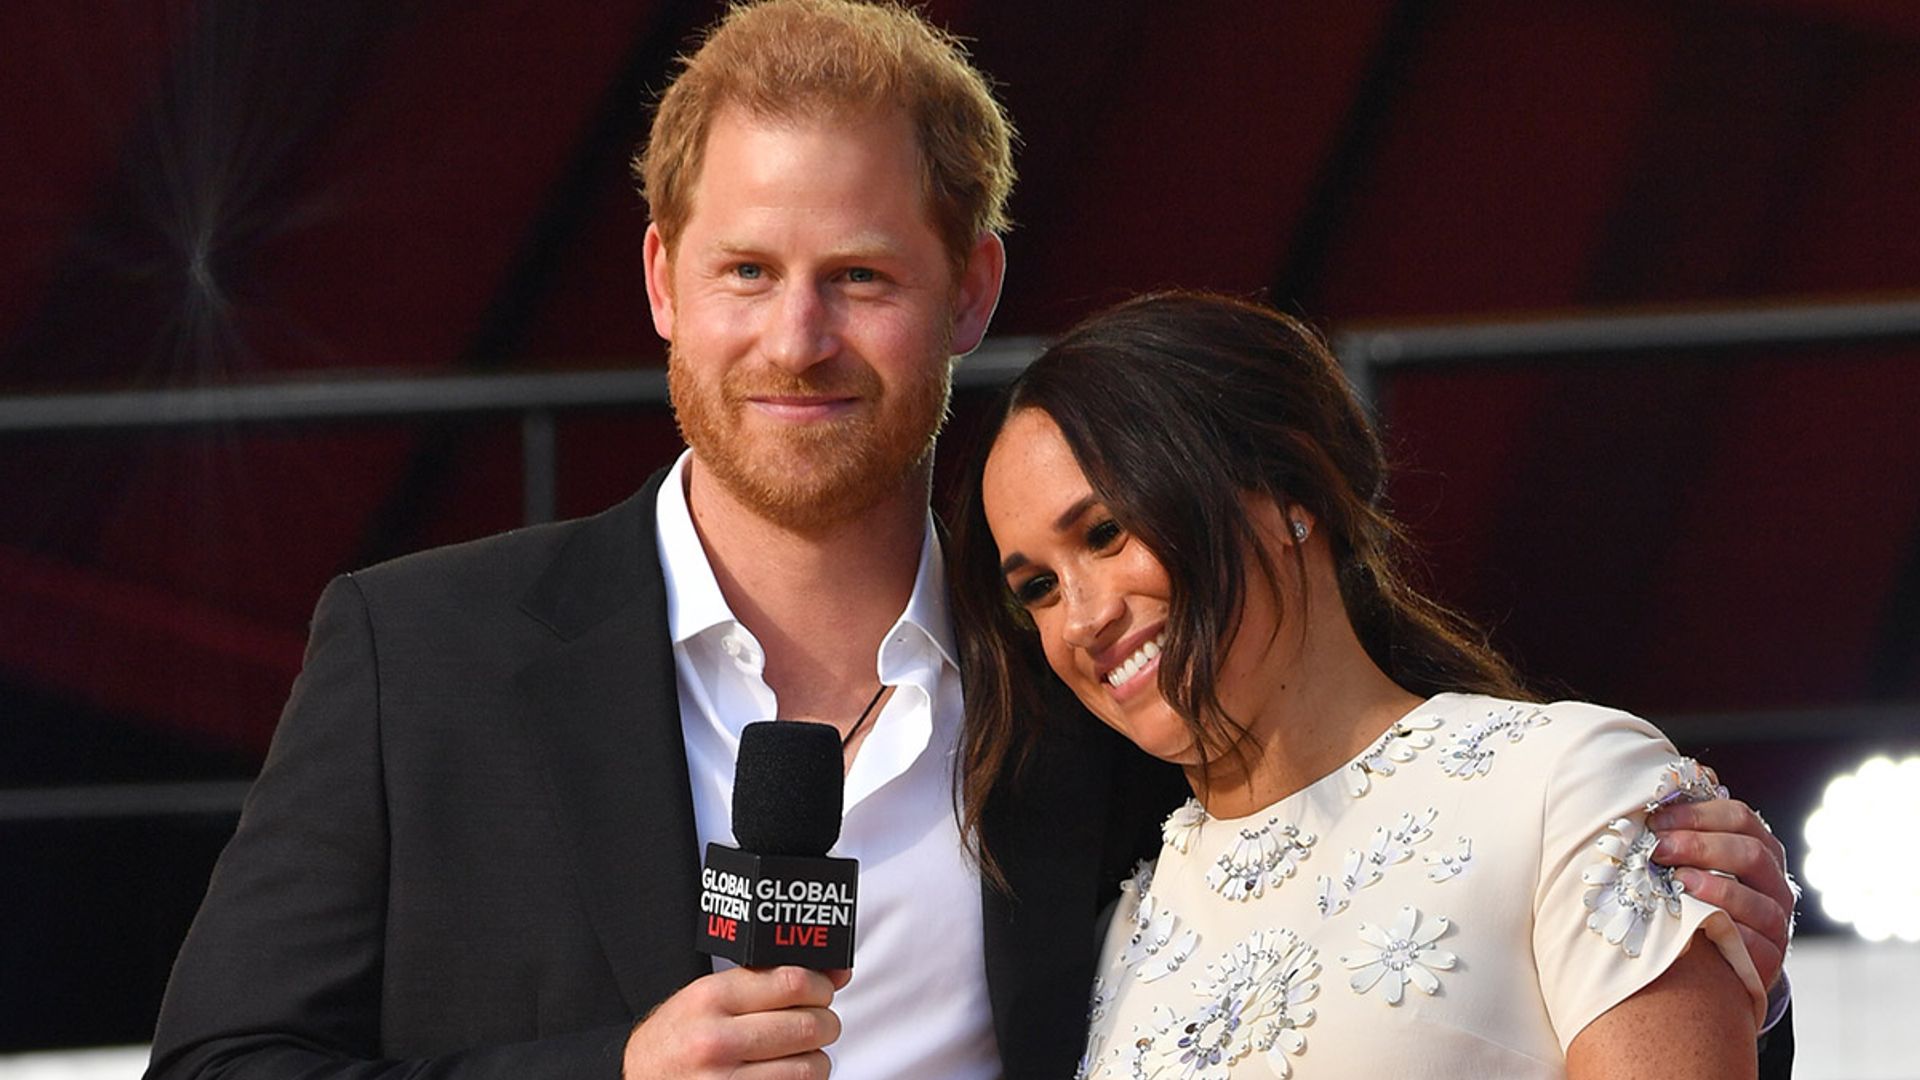 Revealed: Prince Harry and Meghan Markle's weekend plans following surprise Windsor visit